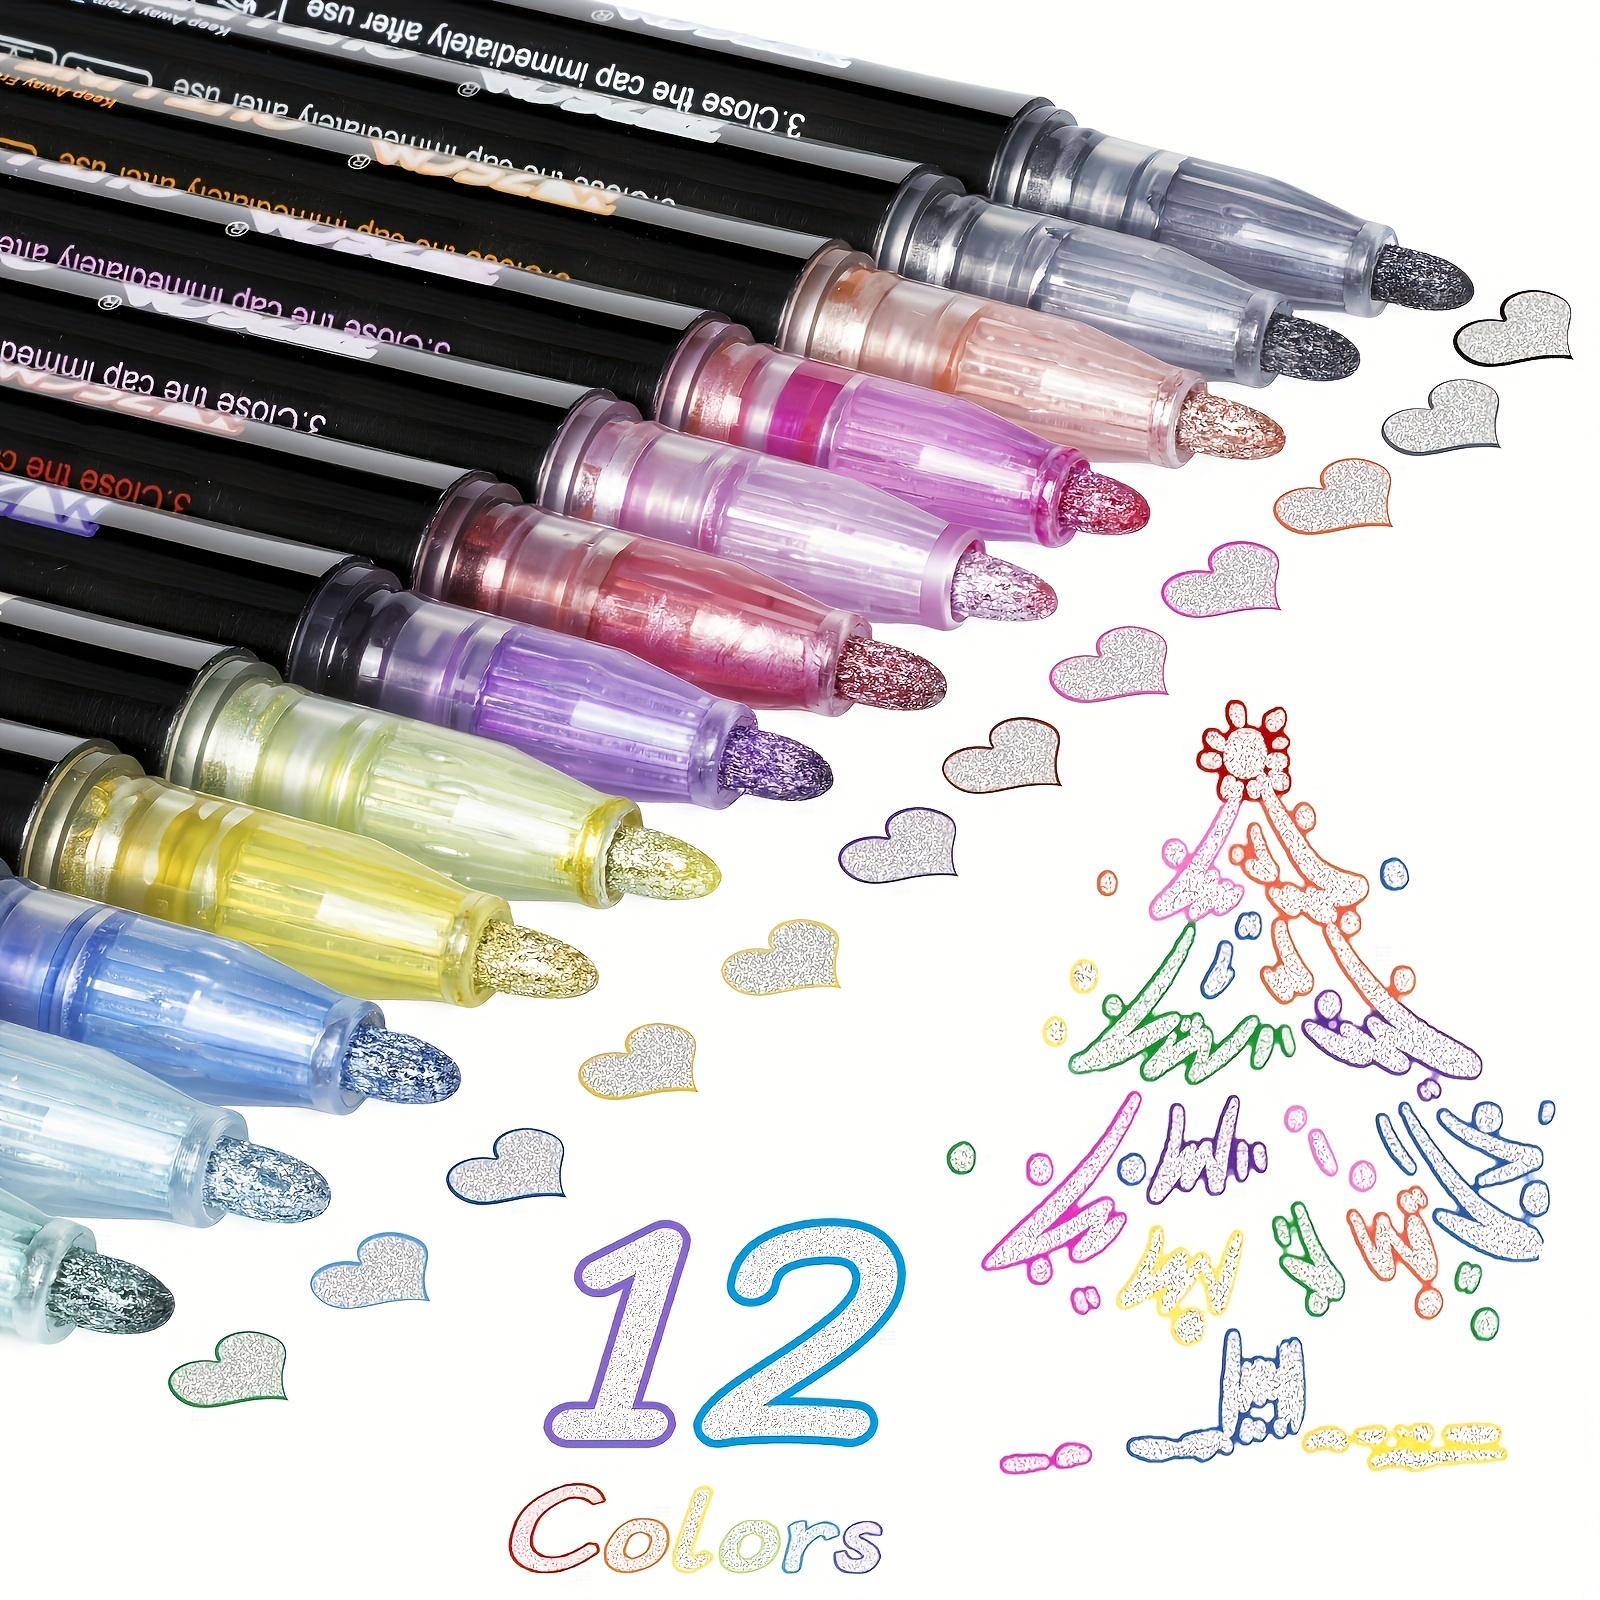 8pcs /Set Outline Marker Creative Metallic Double Lines Art Markers Drawing  Pens for Cards Making Lettering Stationary